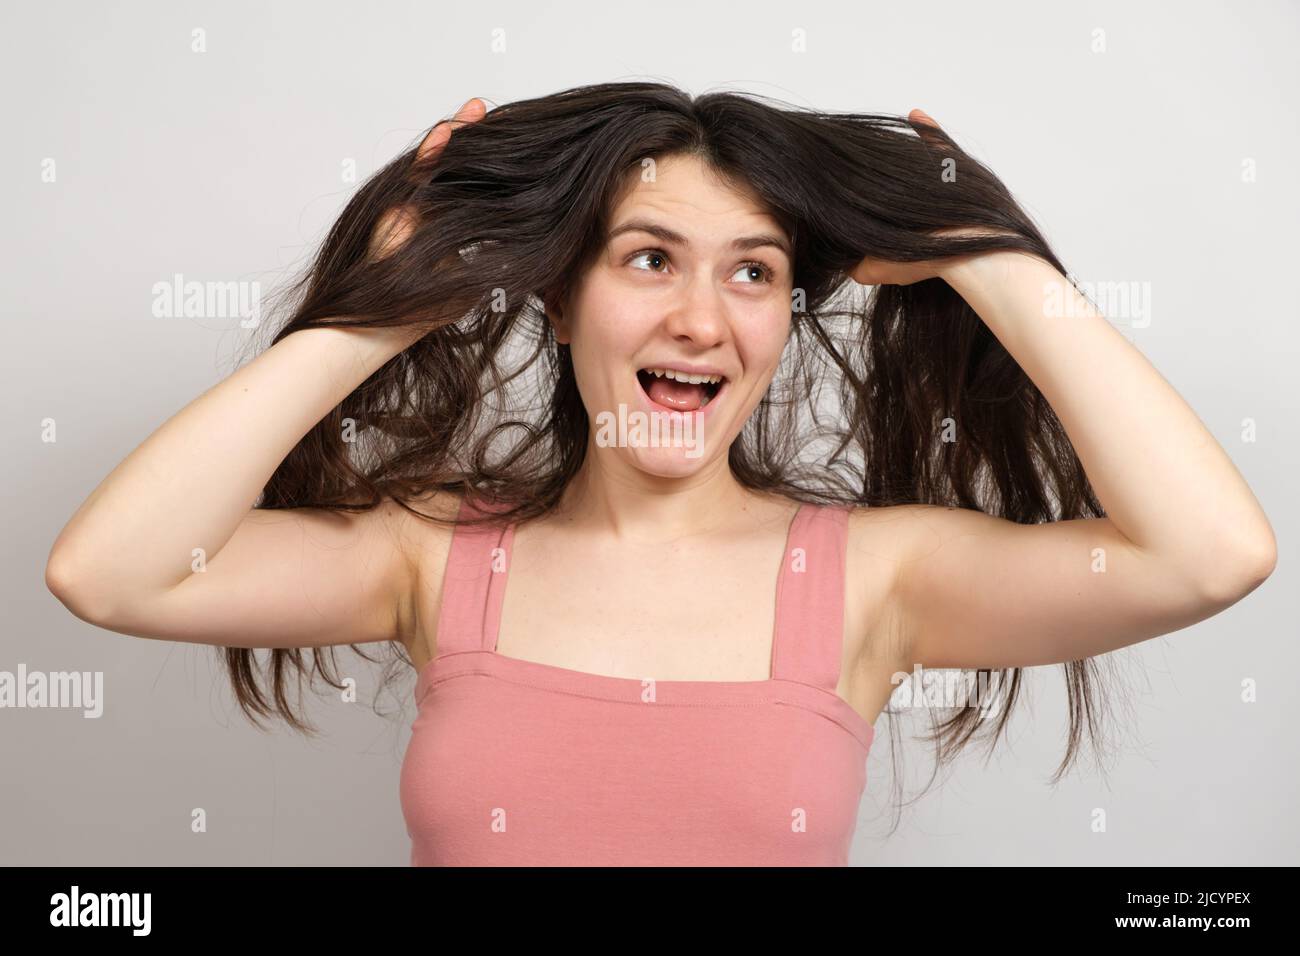 A beautiful brunette woman with long hair on a white background holds her hands on her head and thinks about what hairstyle to do Stock Photo